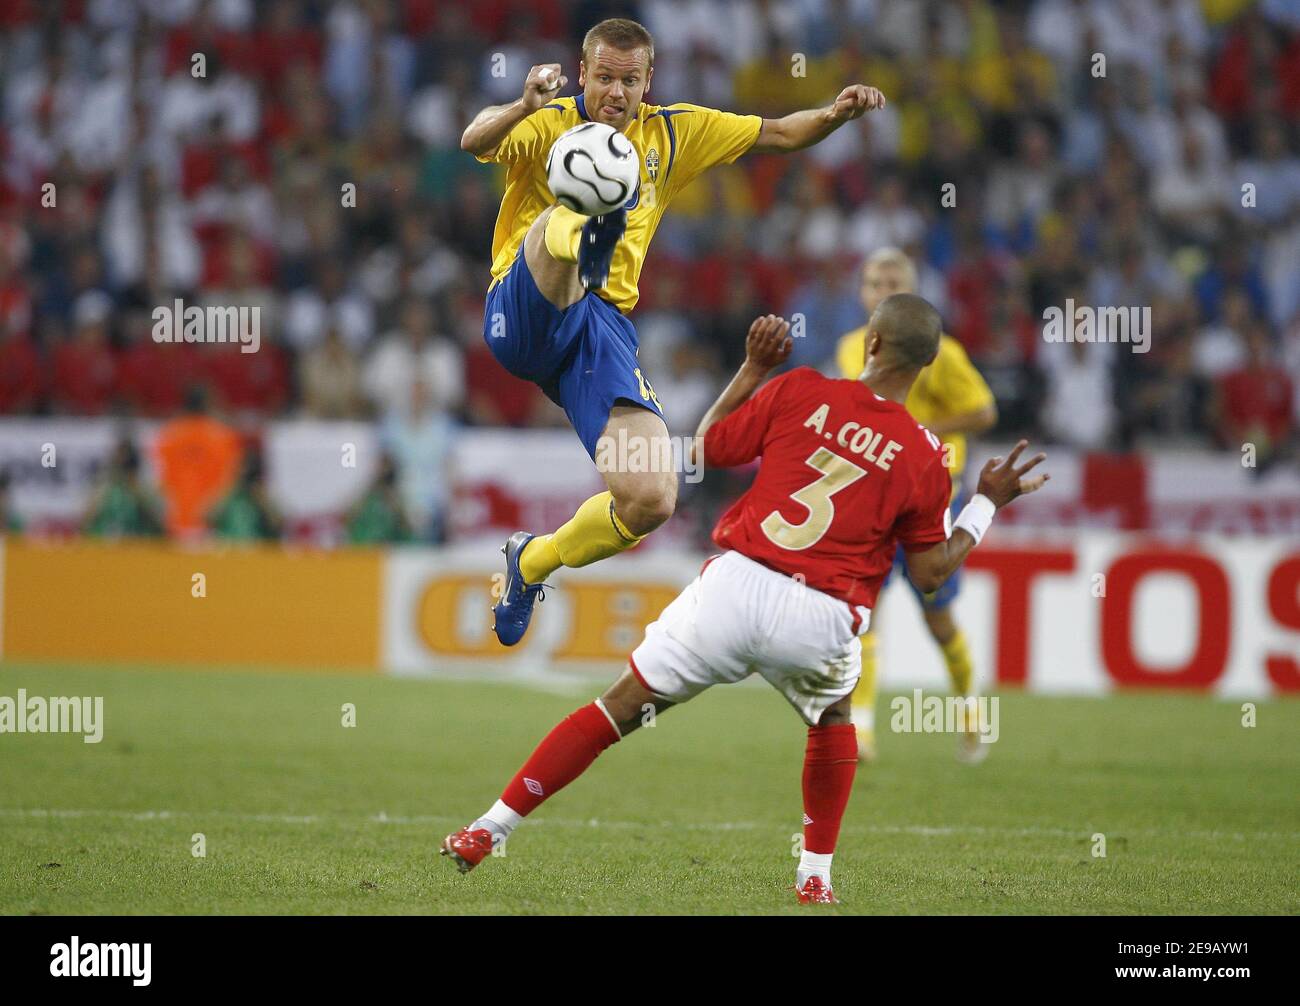 Sweden's Mattias Jonson and England's Ashley Cole during the World Cup 2006, Group B, Sweden vs England at the Rhein-Energie-Stadion Stadium in Cologne, Germany on June 20, 2006. The match ended in 2-2 draw. Photo by Christian Liewig/ABACAPRESS.COM Stock Photo